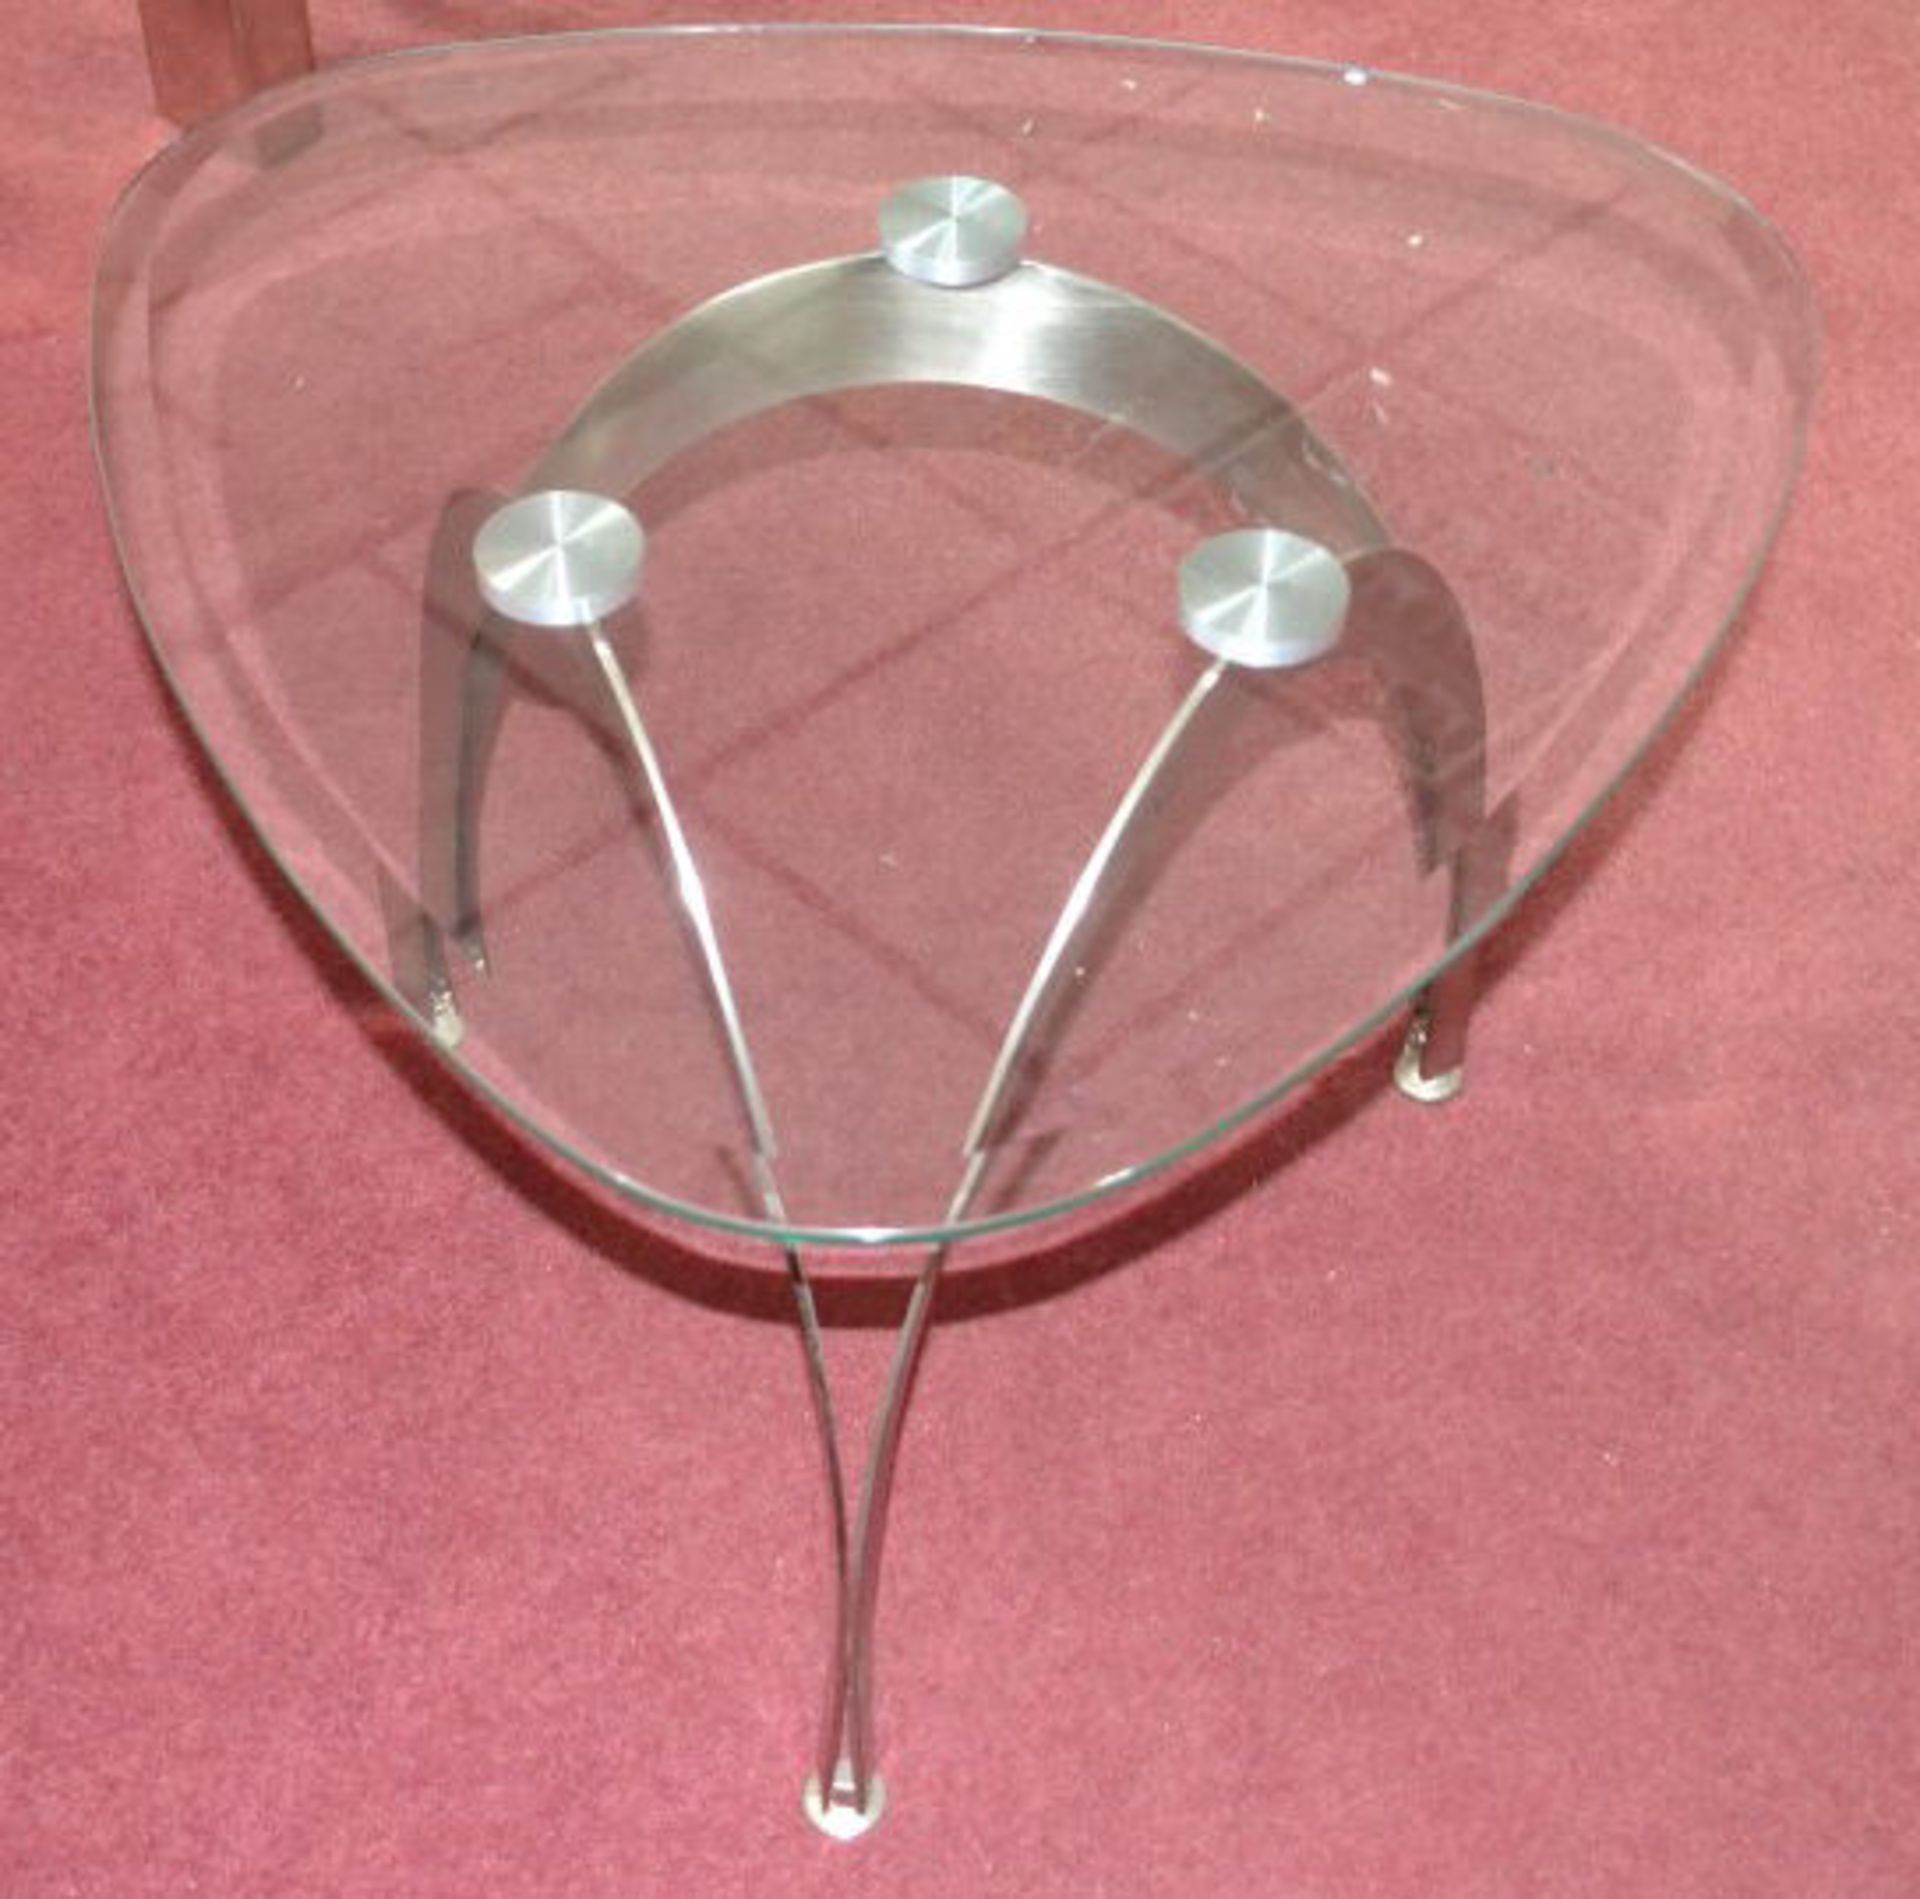 1 x Contemporary Triangular Glass Side Table with Satin Nickel Legs - Image 3 of 4